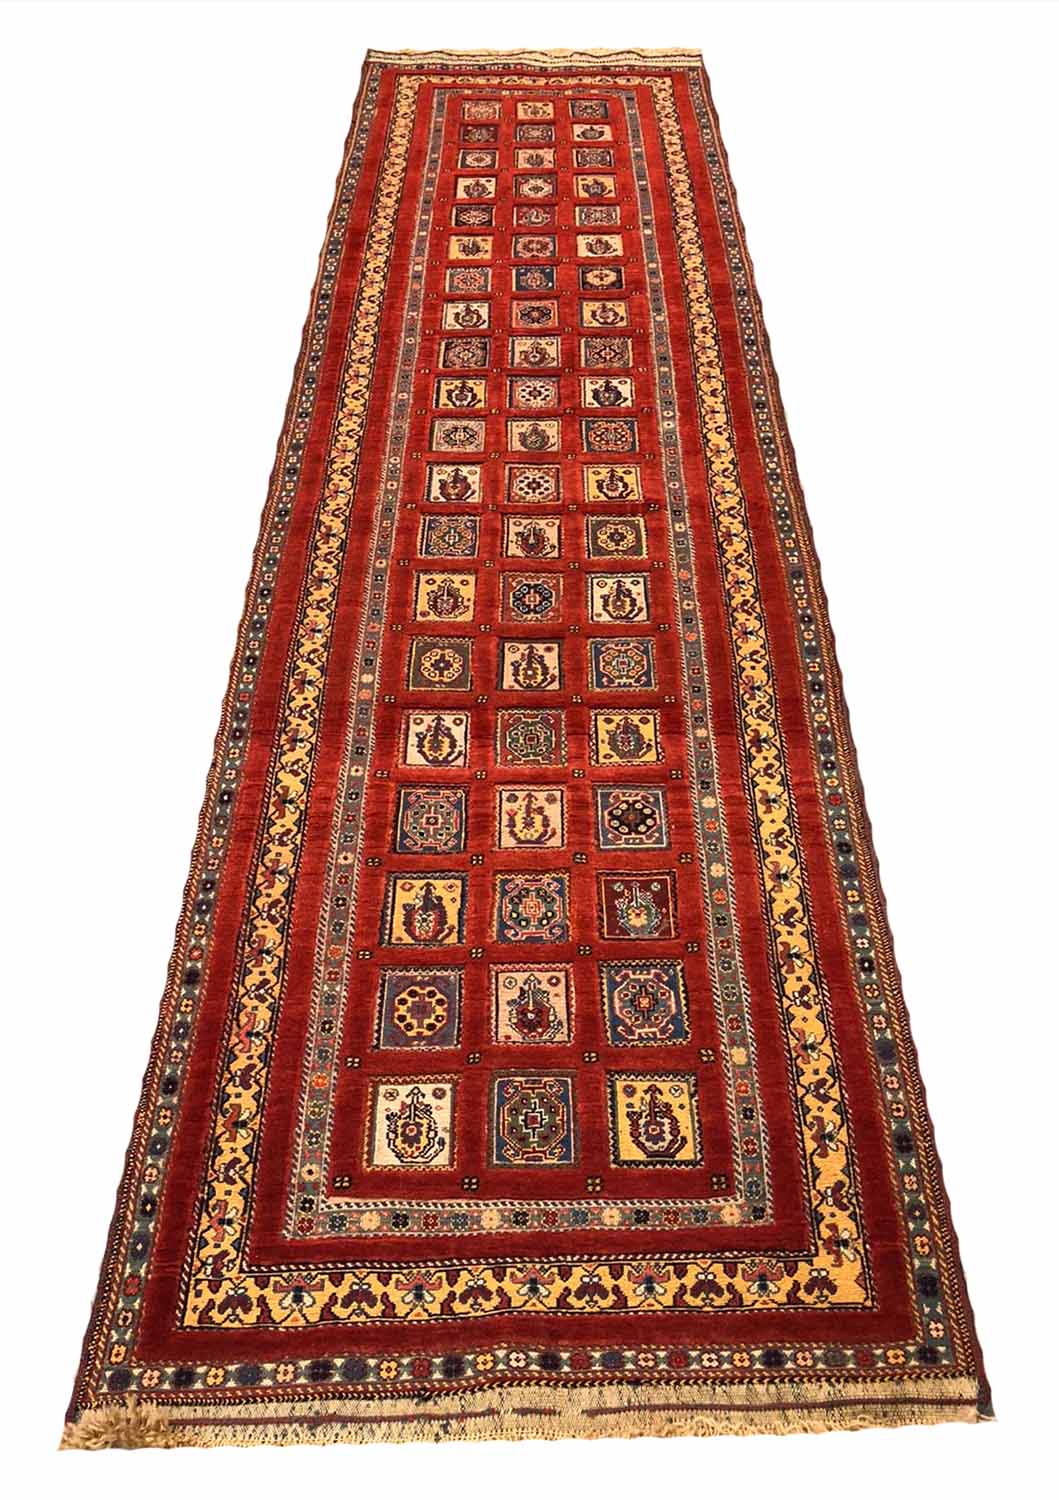 FINE PERSIAN QASHQAI RUNNER, 308cm x 84cm, repeat square medallions within matching borders.